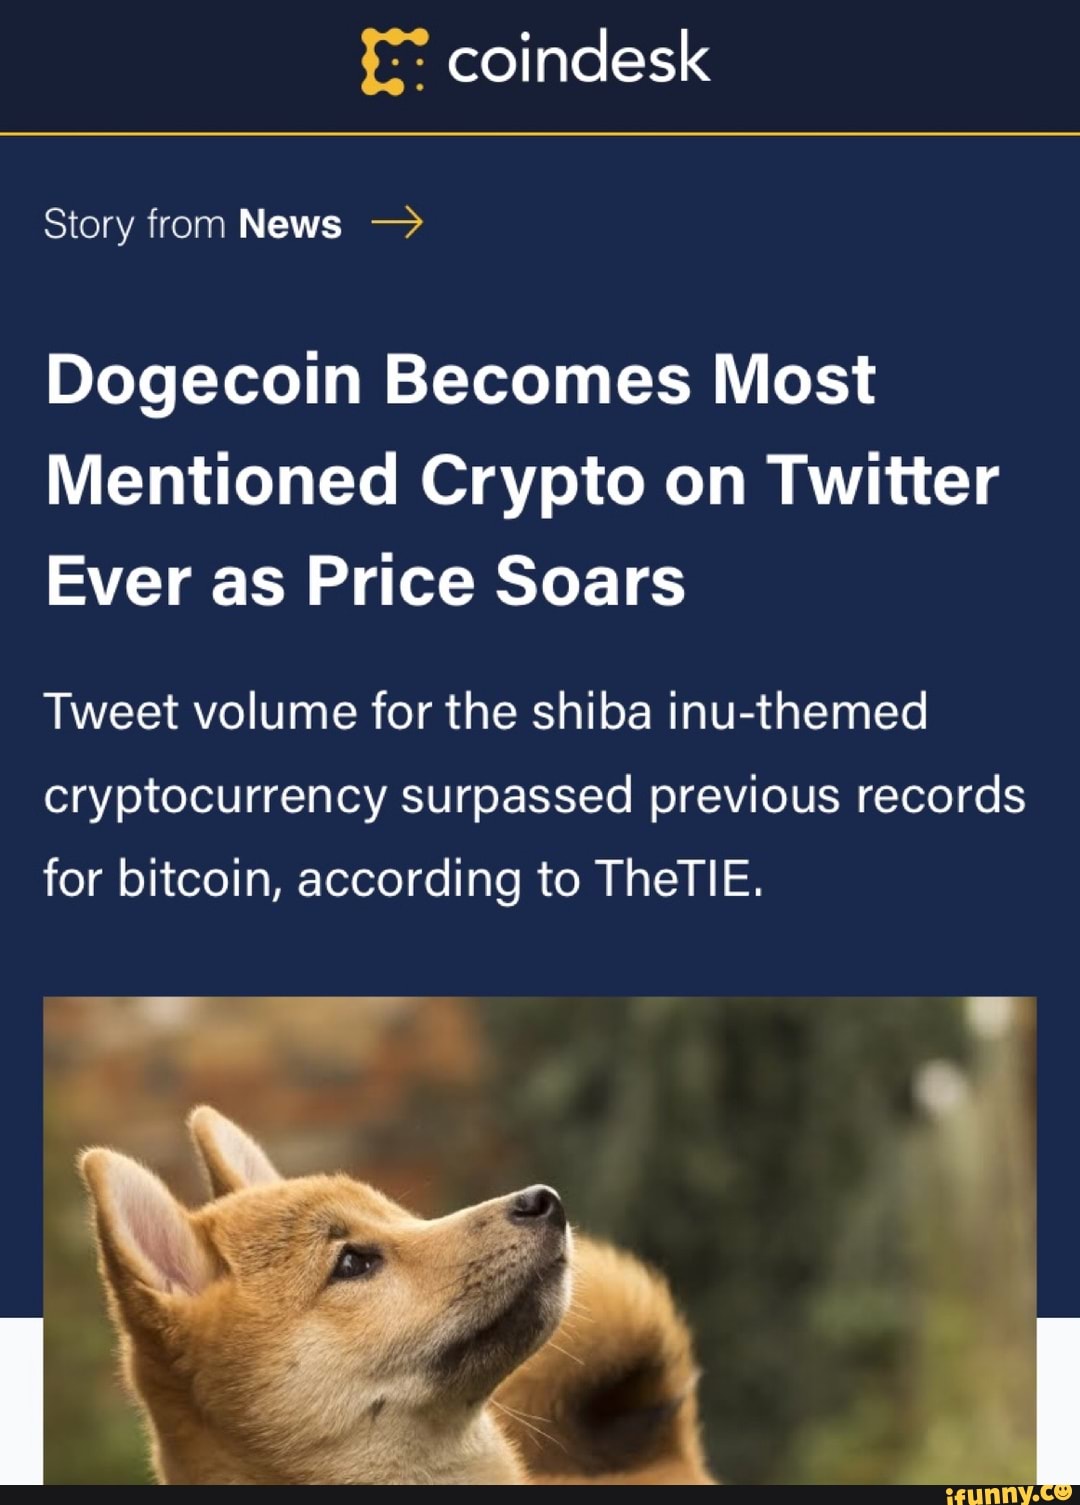 Shiba Inu Crypto Twitter - Nd2vow6xlzli9m - Details on how ...